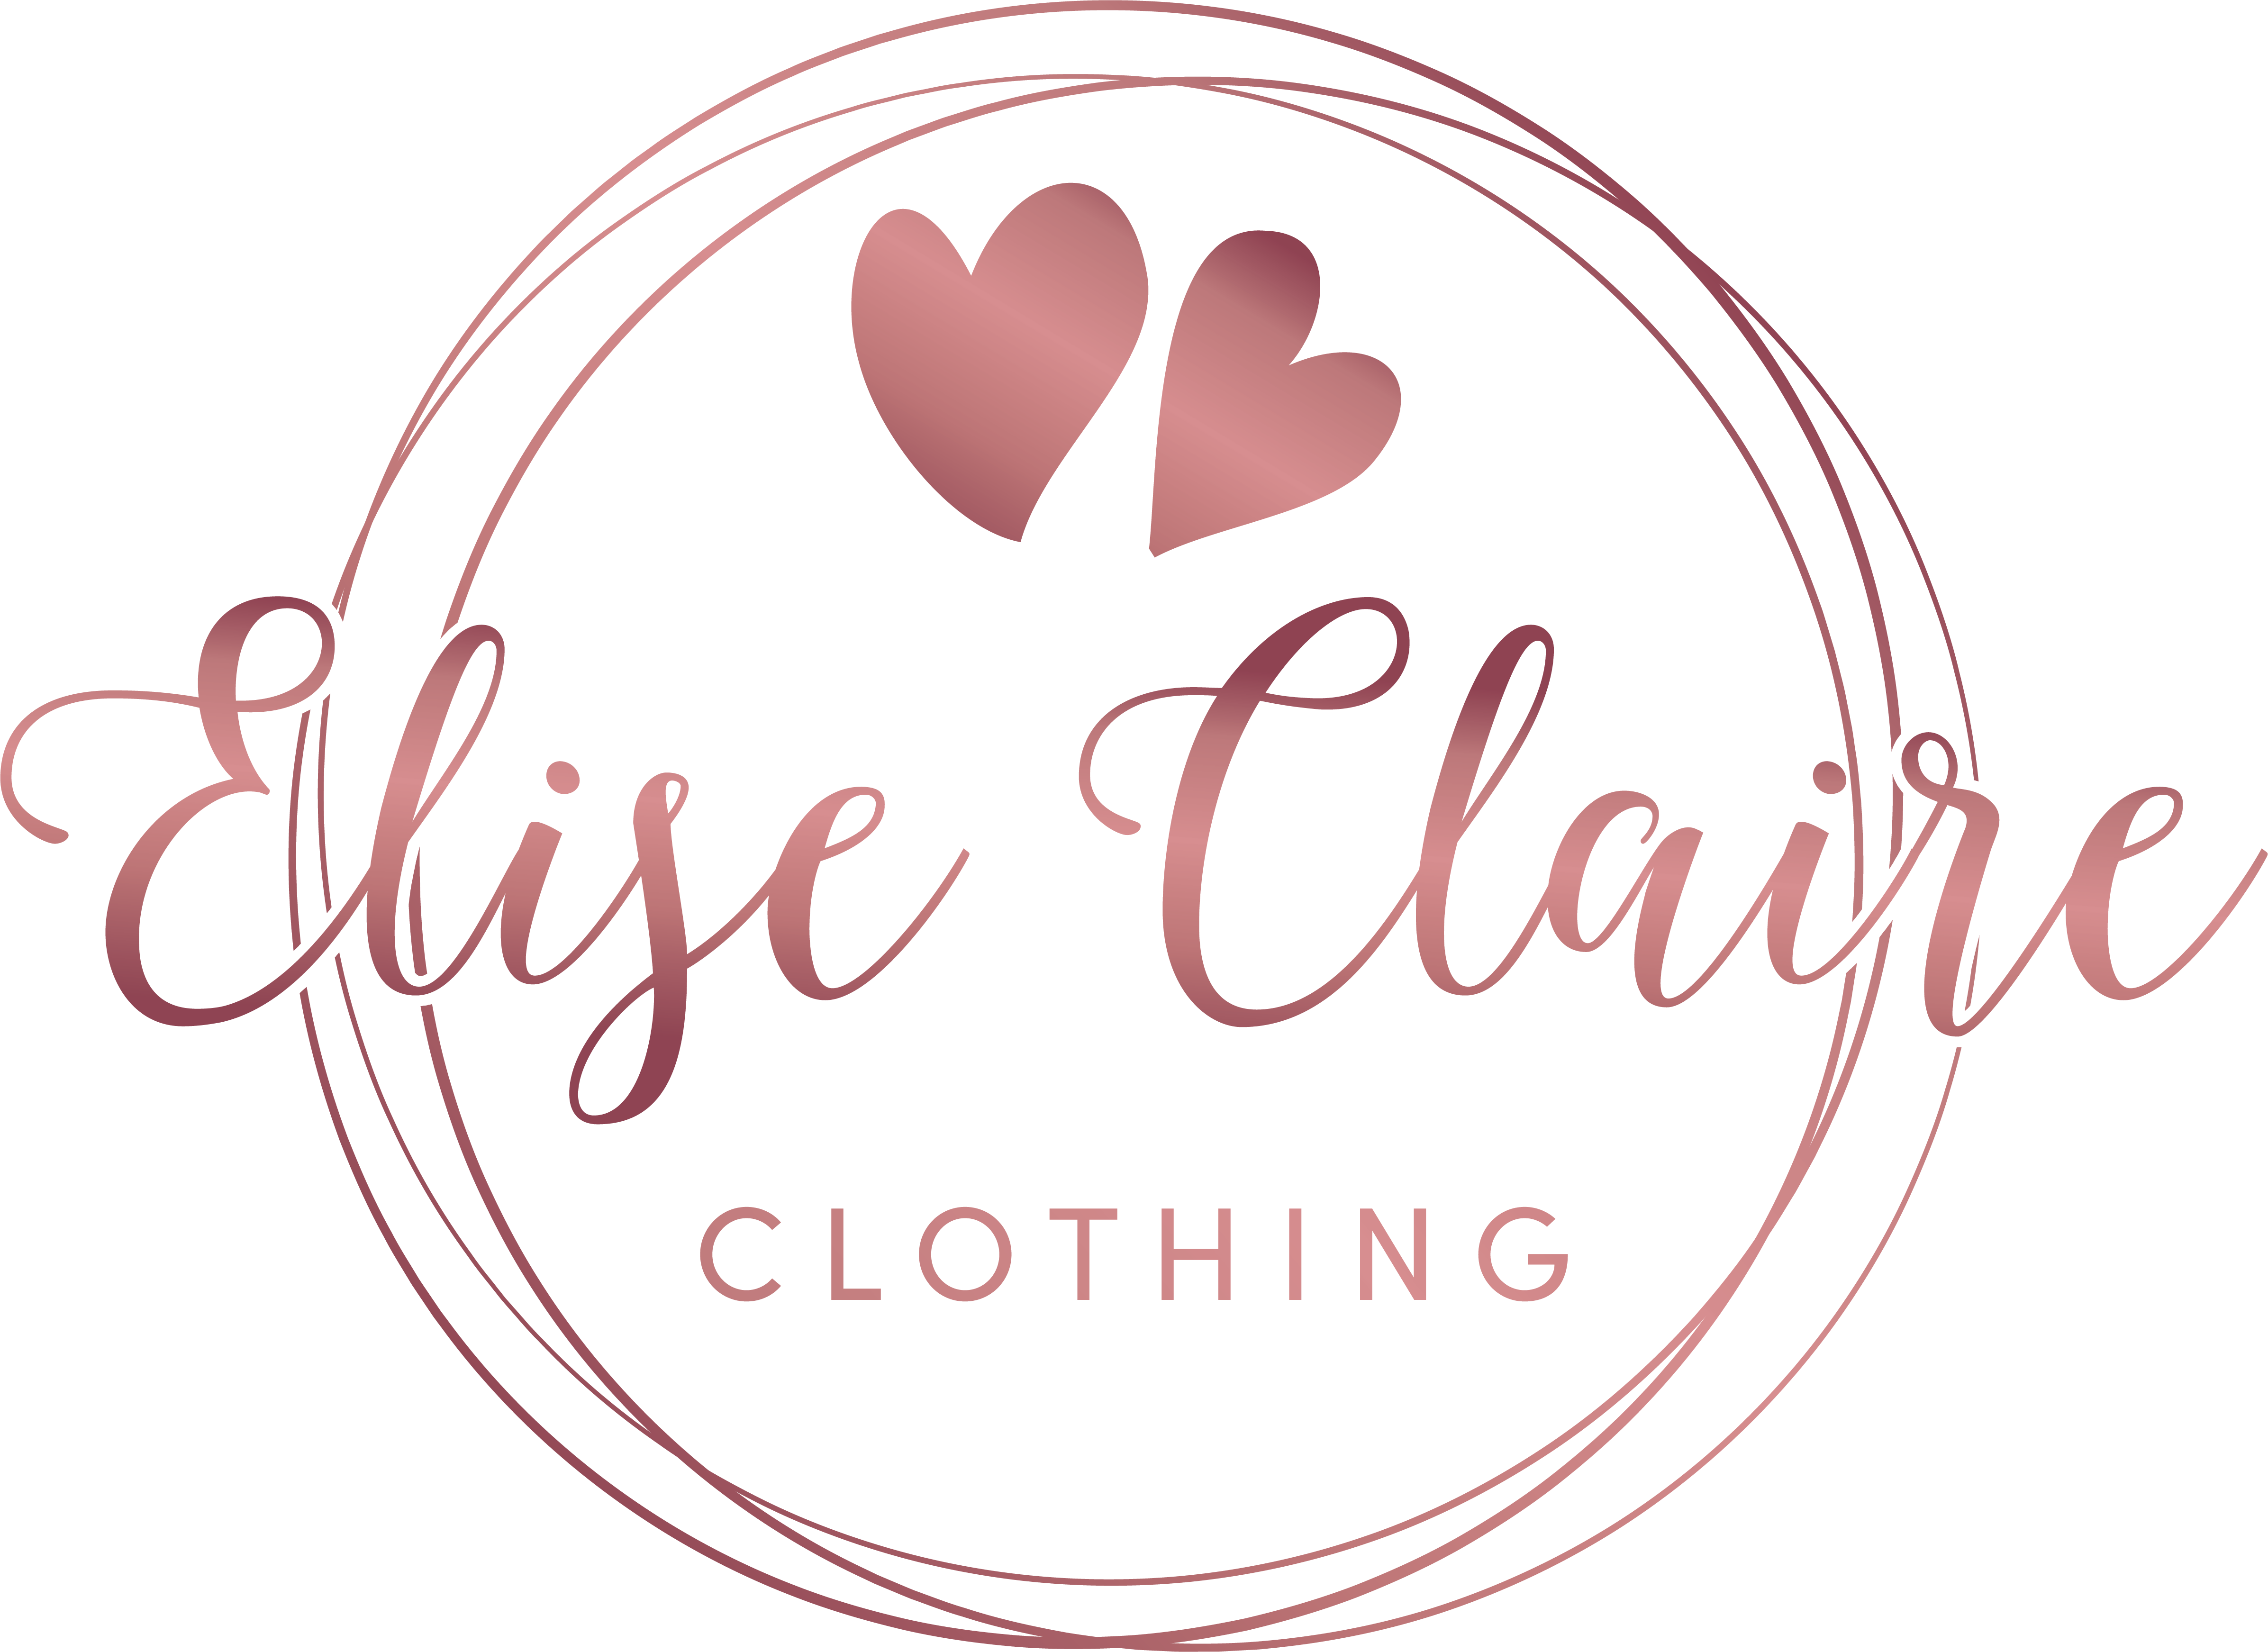 Elise Claire Clothing